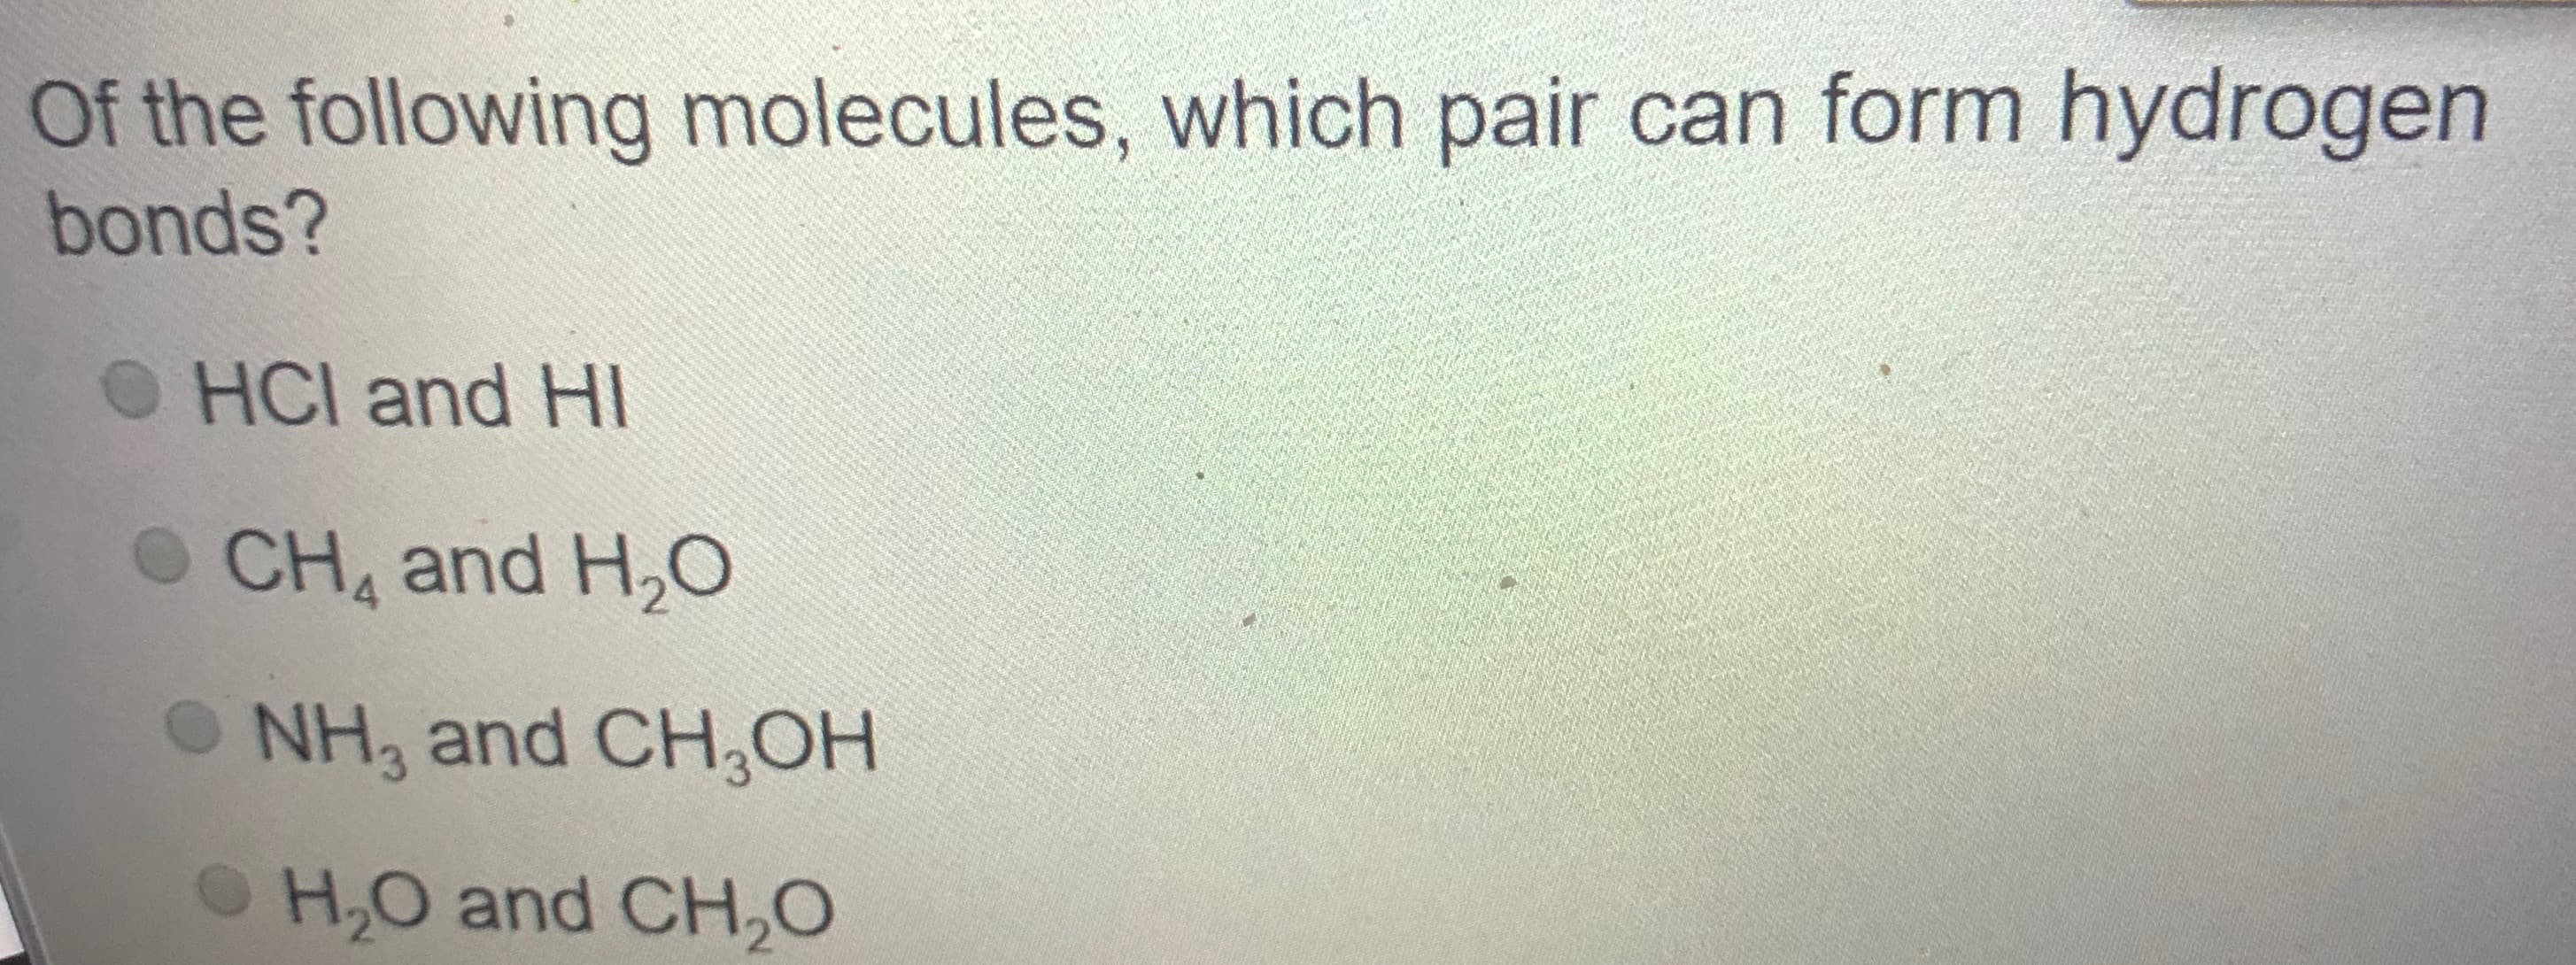 Of the following molecules, which pair can form hydrogen
bonds?
HCI and HI
O CH and H,O
O NH, and CH,OH
OH,0 and CH,O
